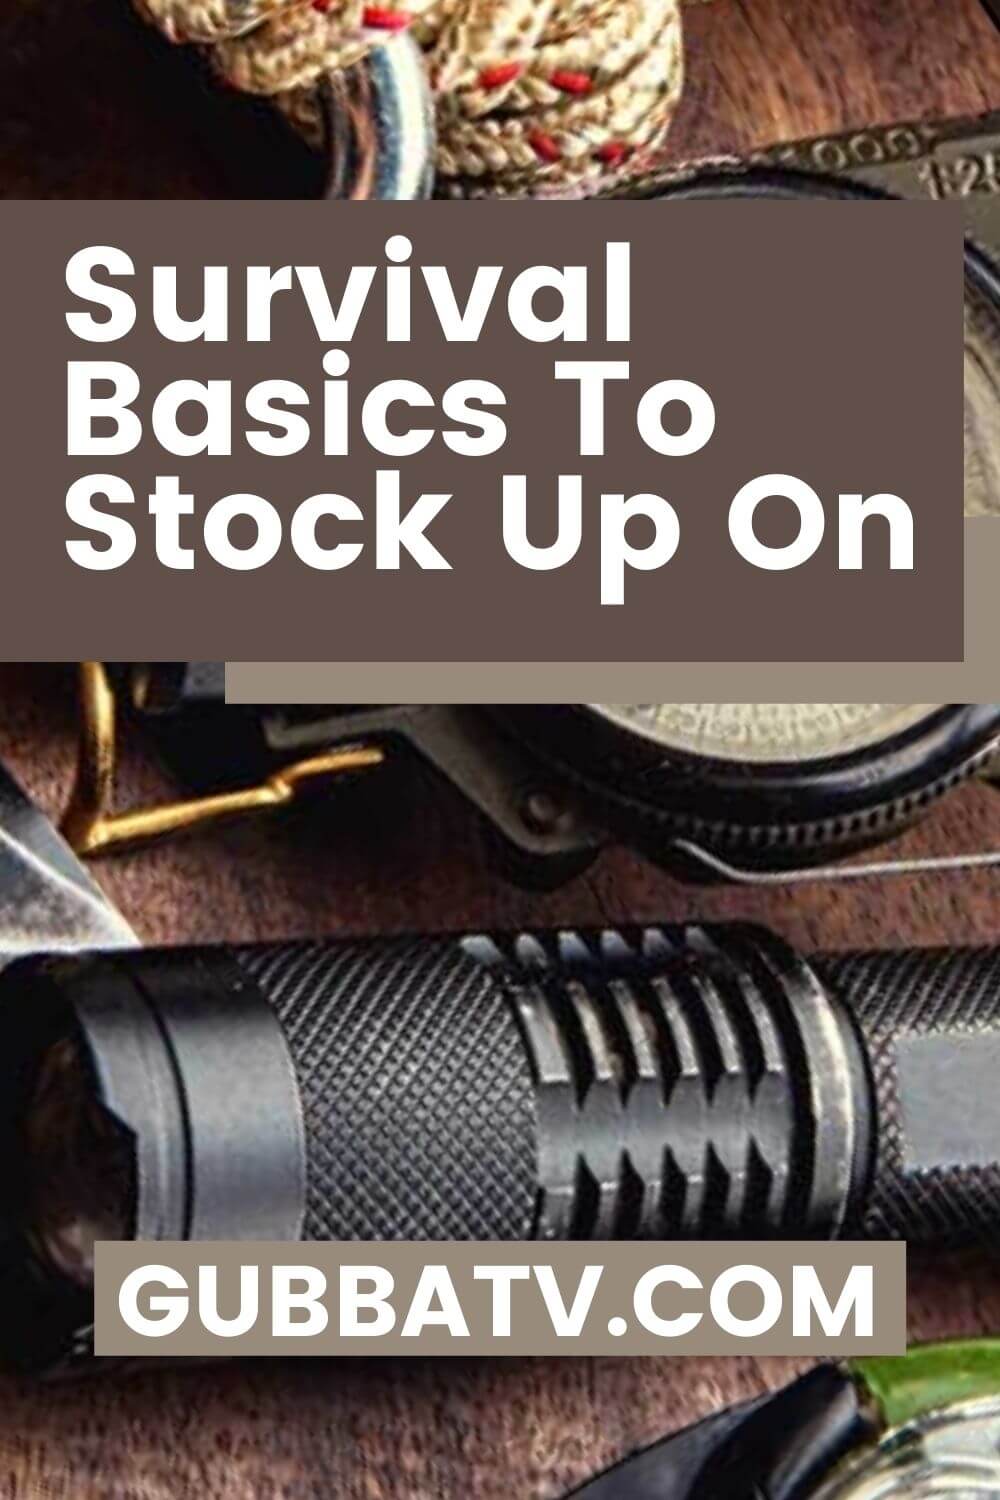 Survival Basics To Stock Up On